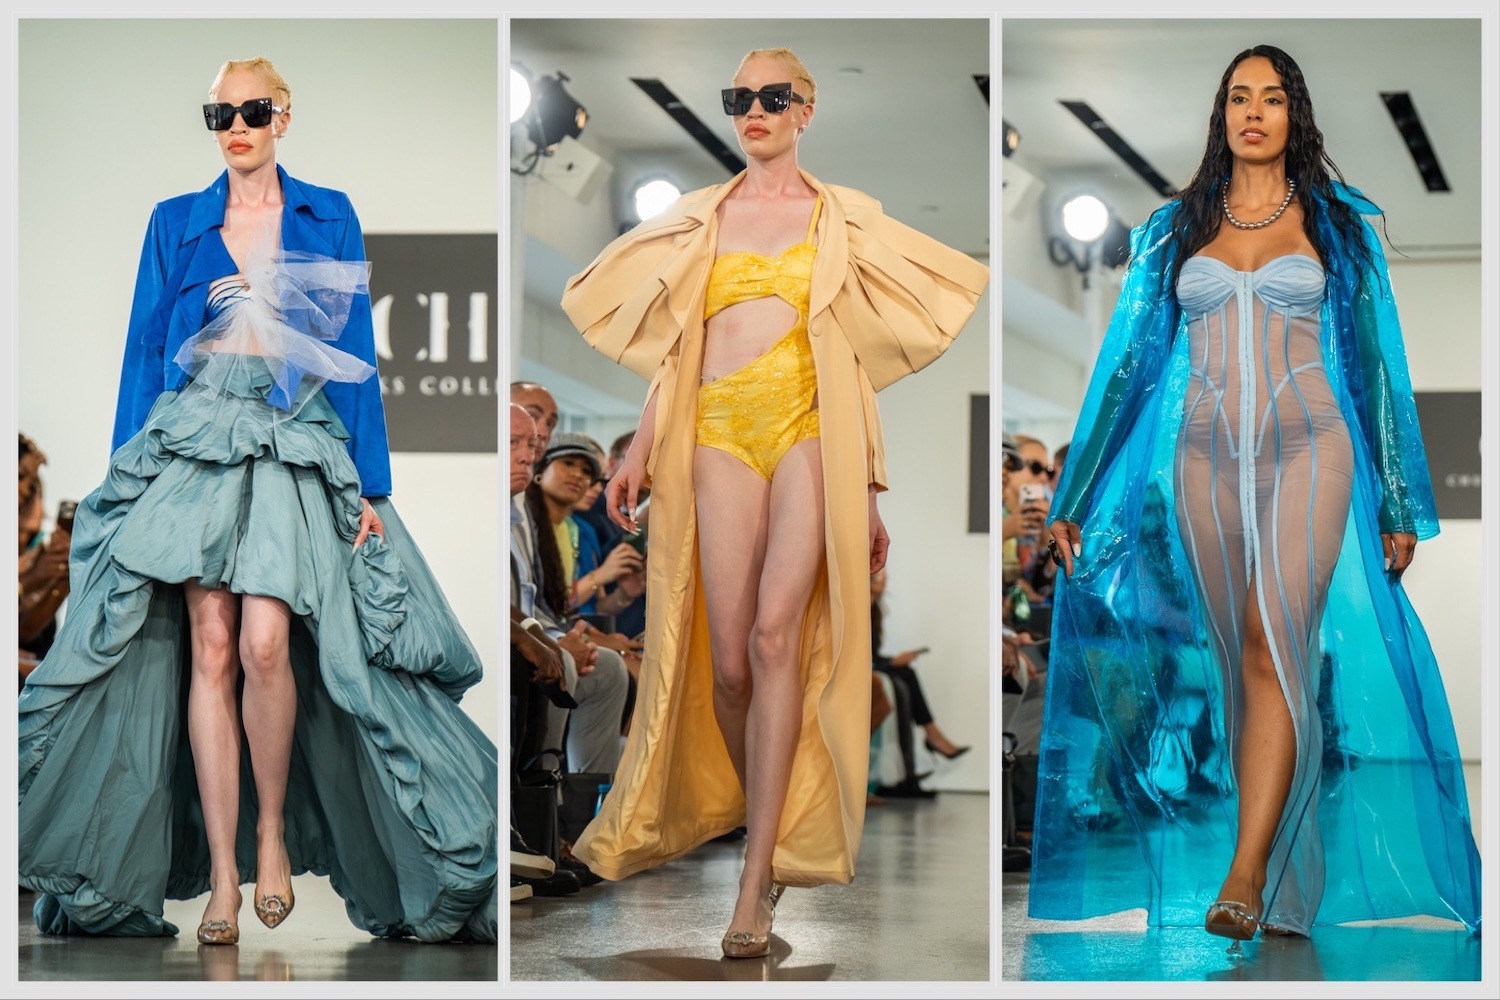 From left to right: a model walking down the runway in a blue blazer and teal high-low skirt; a model walking down the runway in a yellow one-piece body suit with a beige overcoat;; a model walking down the runway in a blue silky see-through dress.